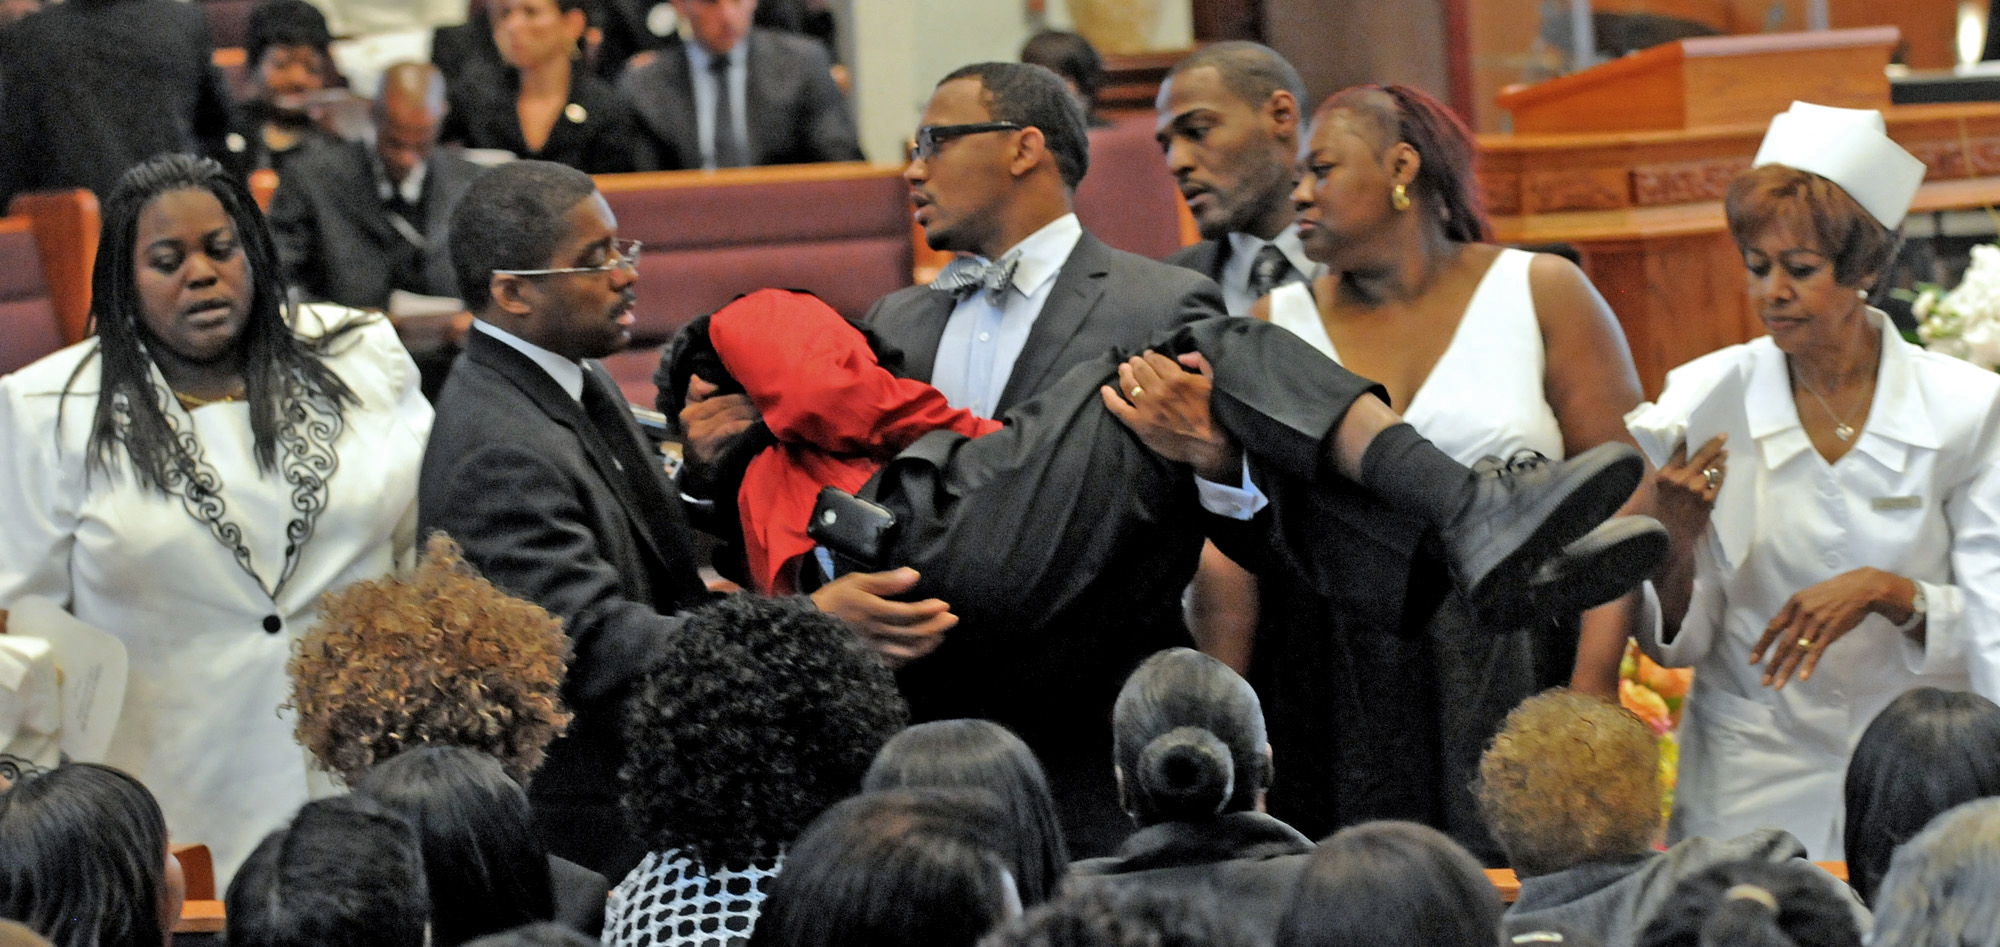 Ebony Flonory fainted upon seeing the bodies of her sister, Eyanna Florony, and her nephew, Amani Smith. (Via AP)